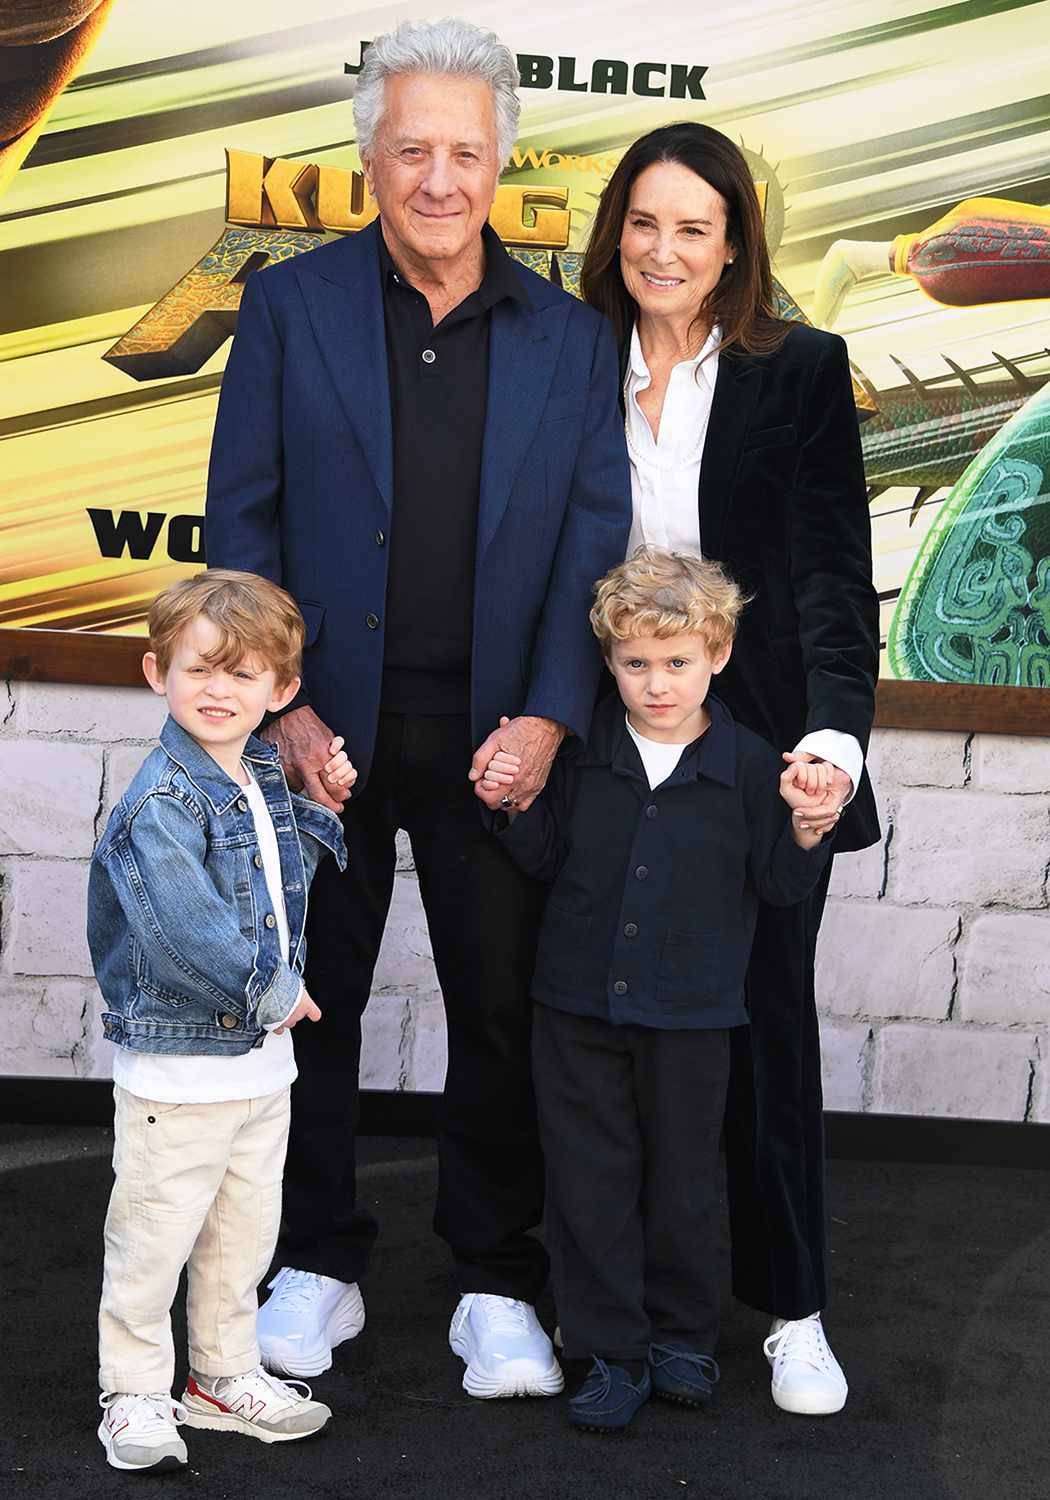 Dustin Hoffman and Lisa Hoffman with their grandkids at the premiere of "Kung Fu Panda 4" held at AMC The Grove 14 on March 3, 2024 in Los Angeles, California. 